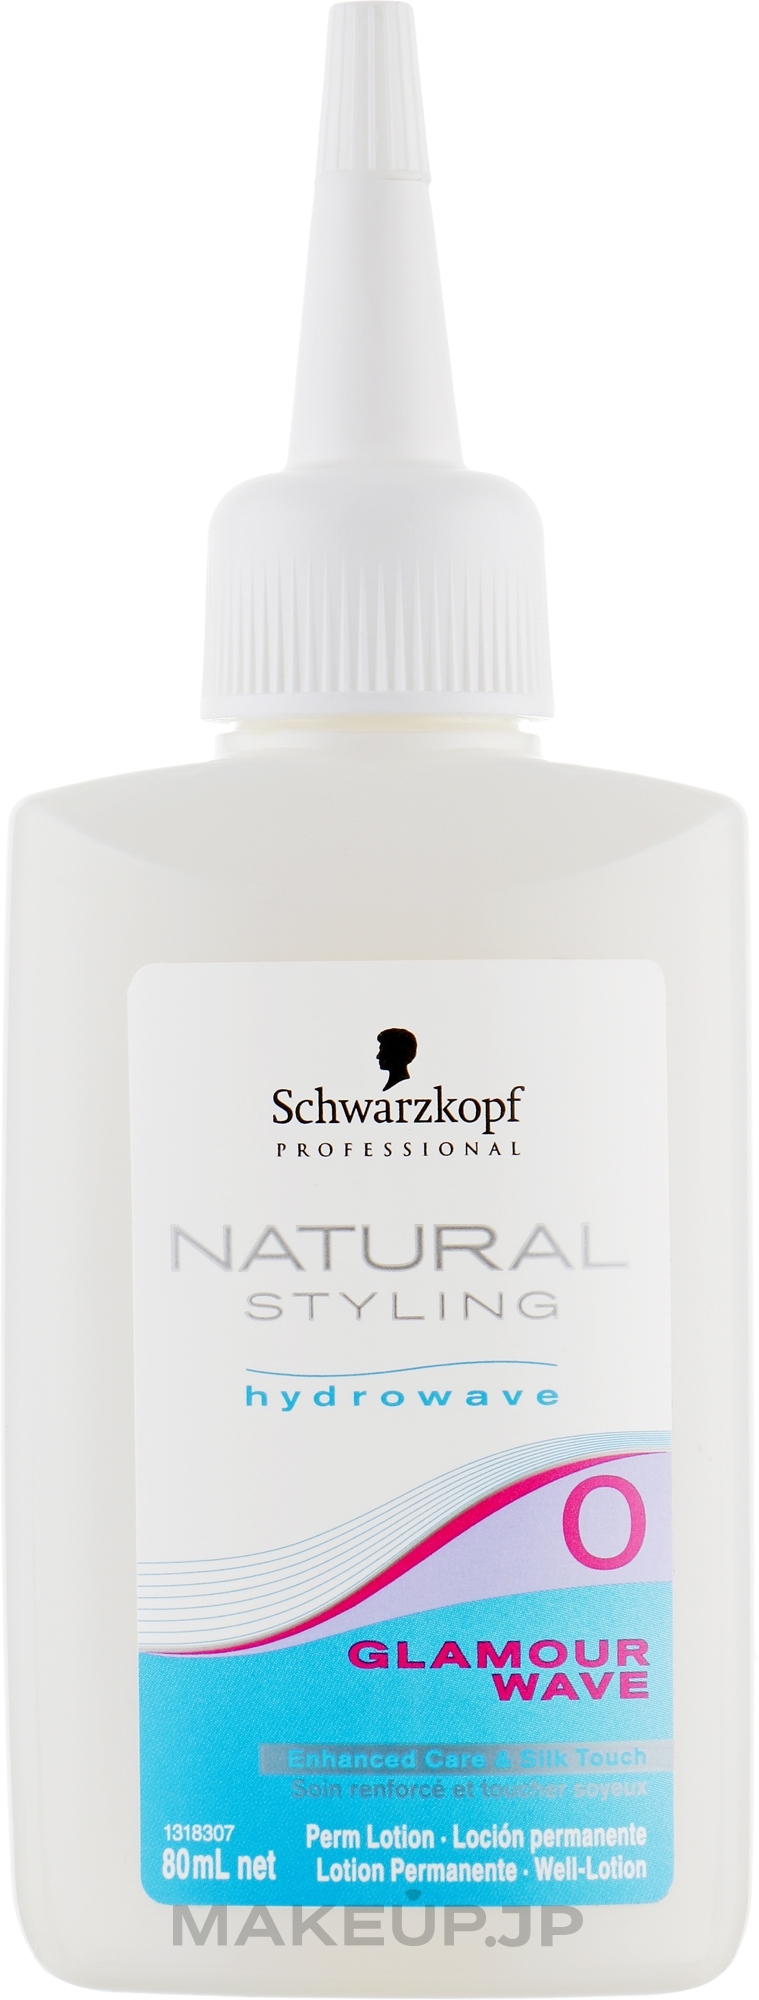 2-Phase Perm for Hard-to-Curl Hair - Schwarzkopf Professional Natural Styling Curl & Care 0 — photo 80 ml